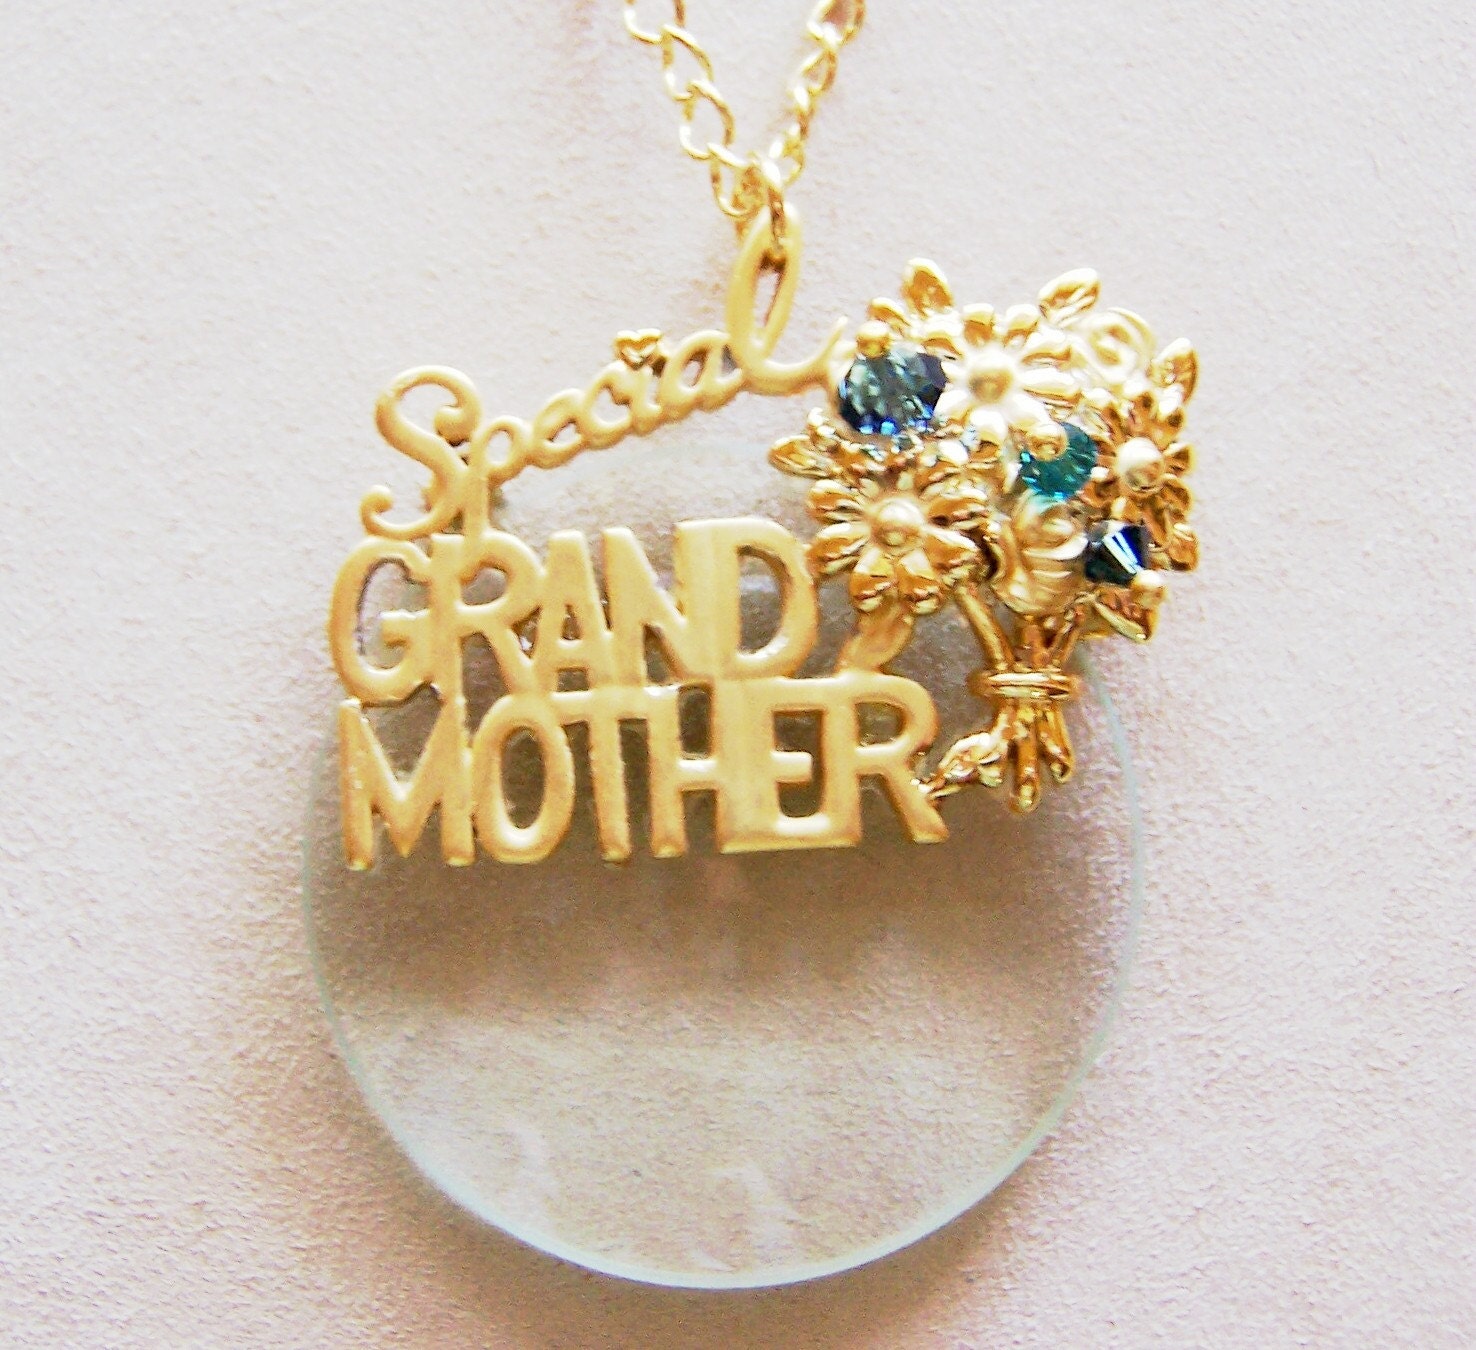 Grandmother Necklace on Grandmother Magnifying Love Necklace By Januaryjaniesjewelry